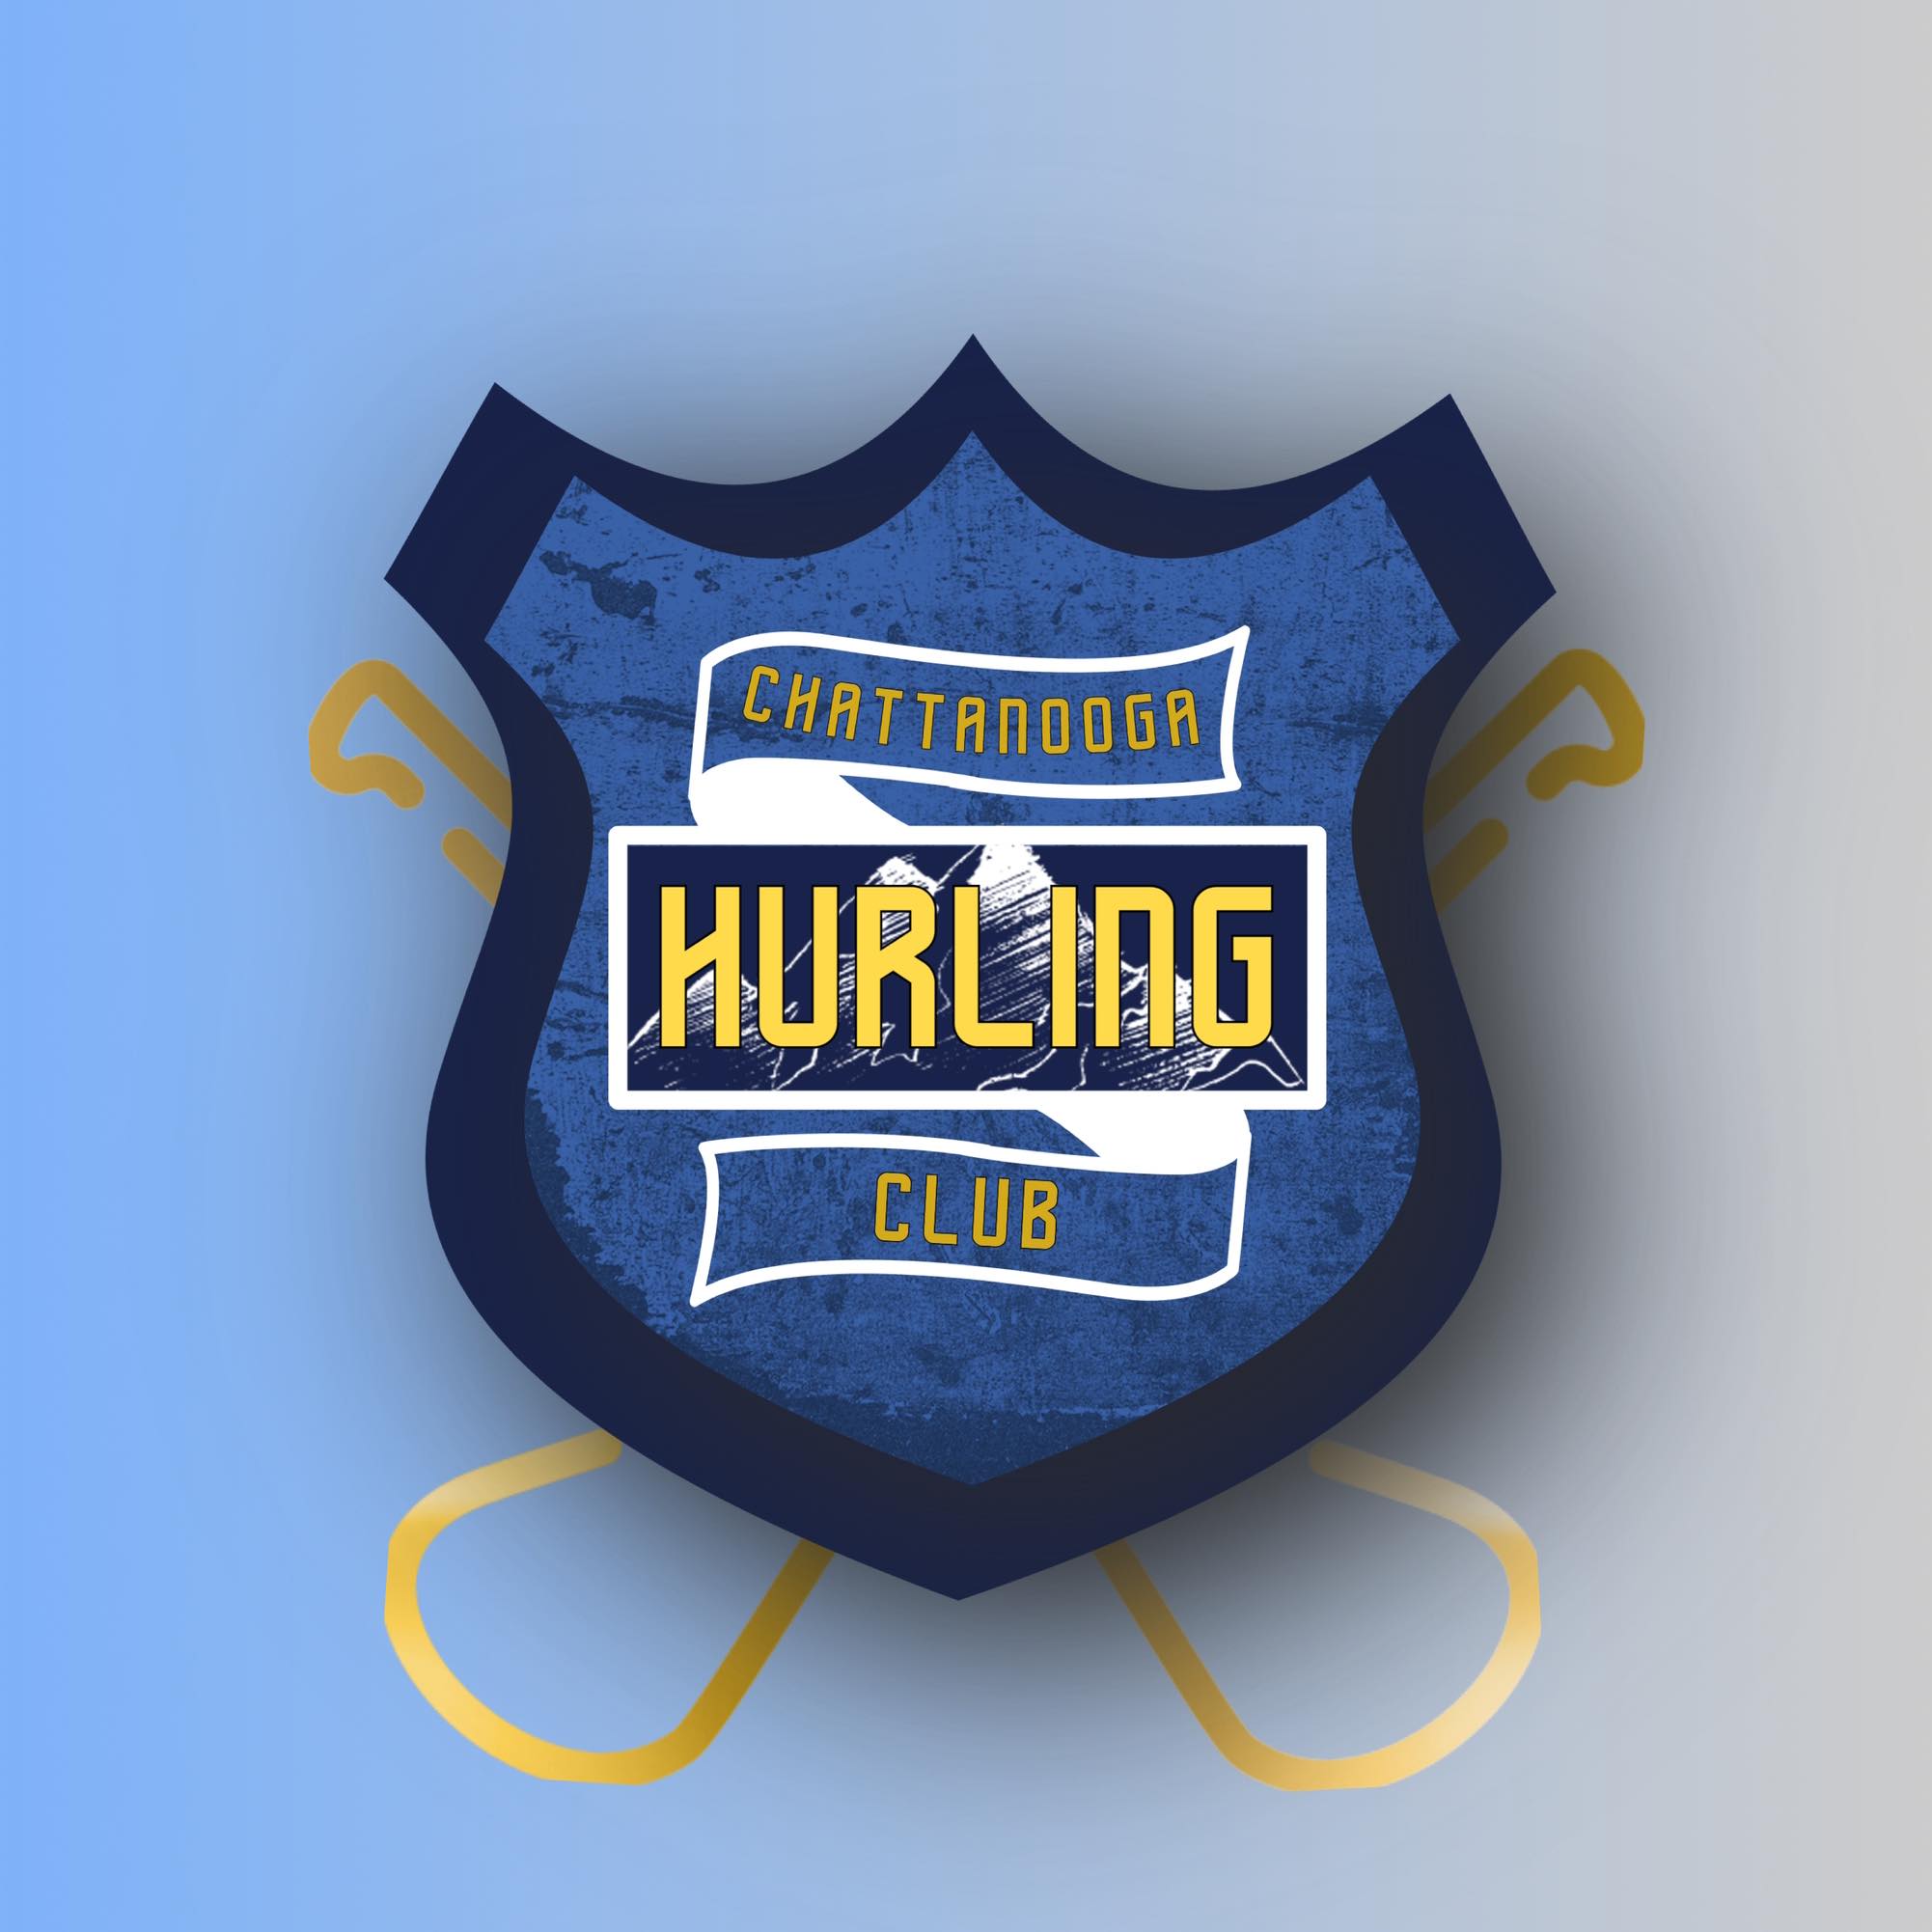 Chattanooga Hurling Club Tennessee